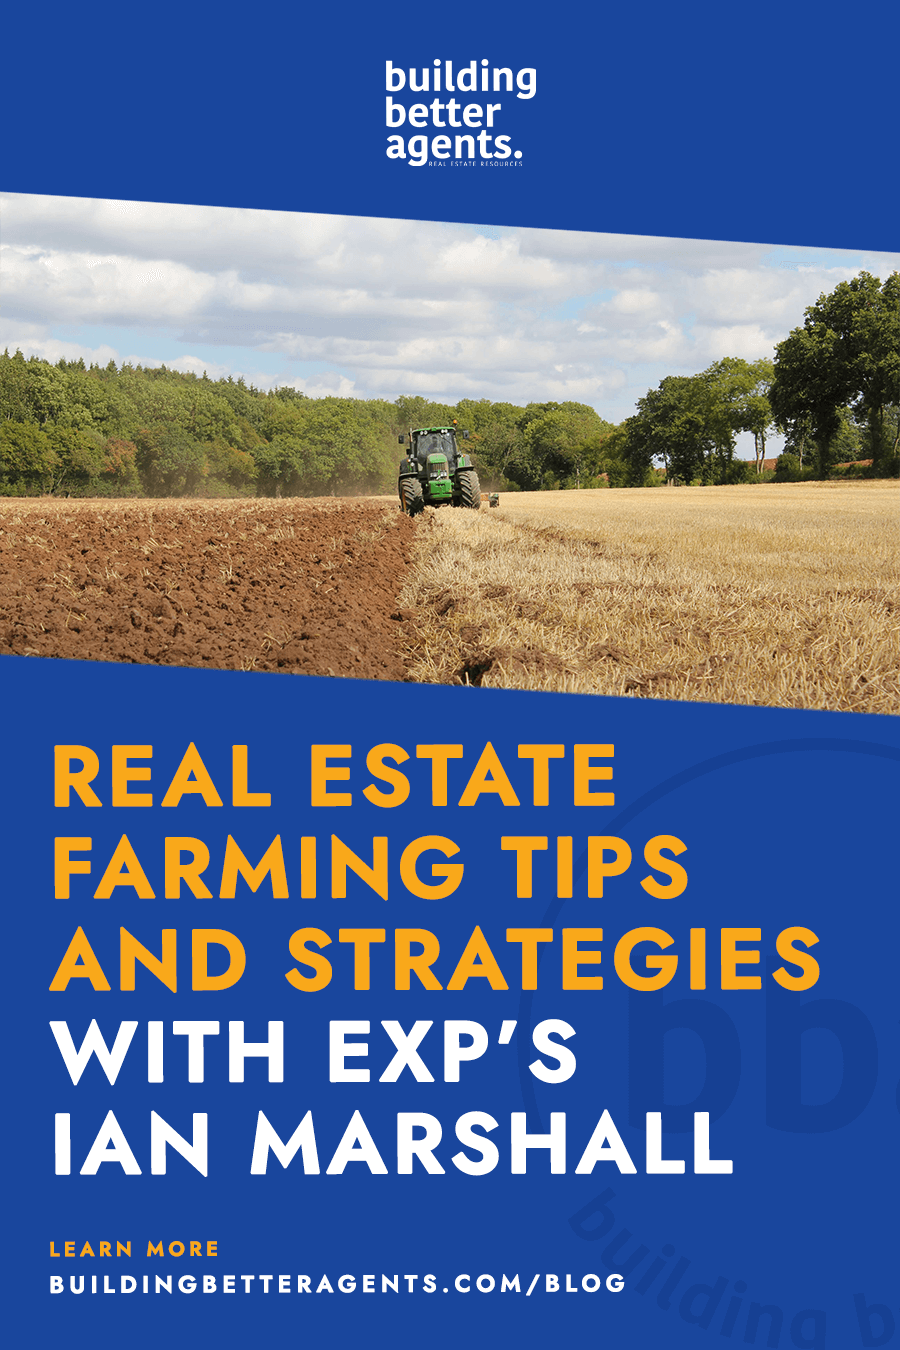 Get the latest real estate farming tips and strategies